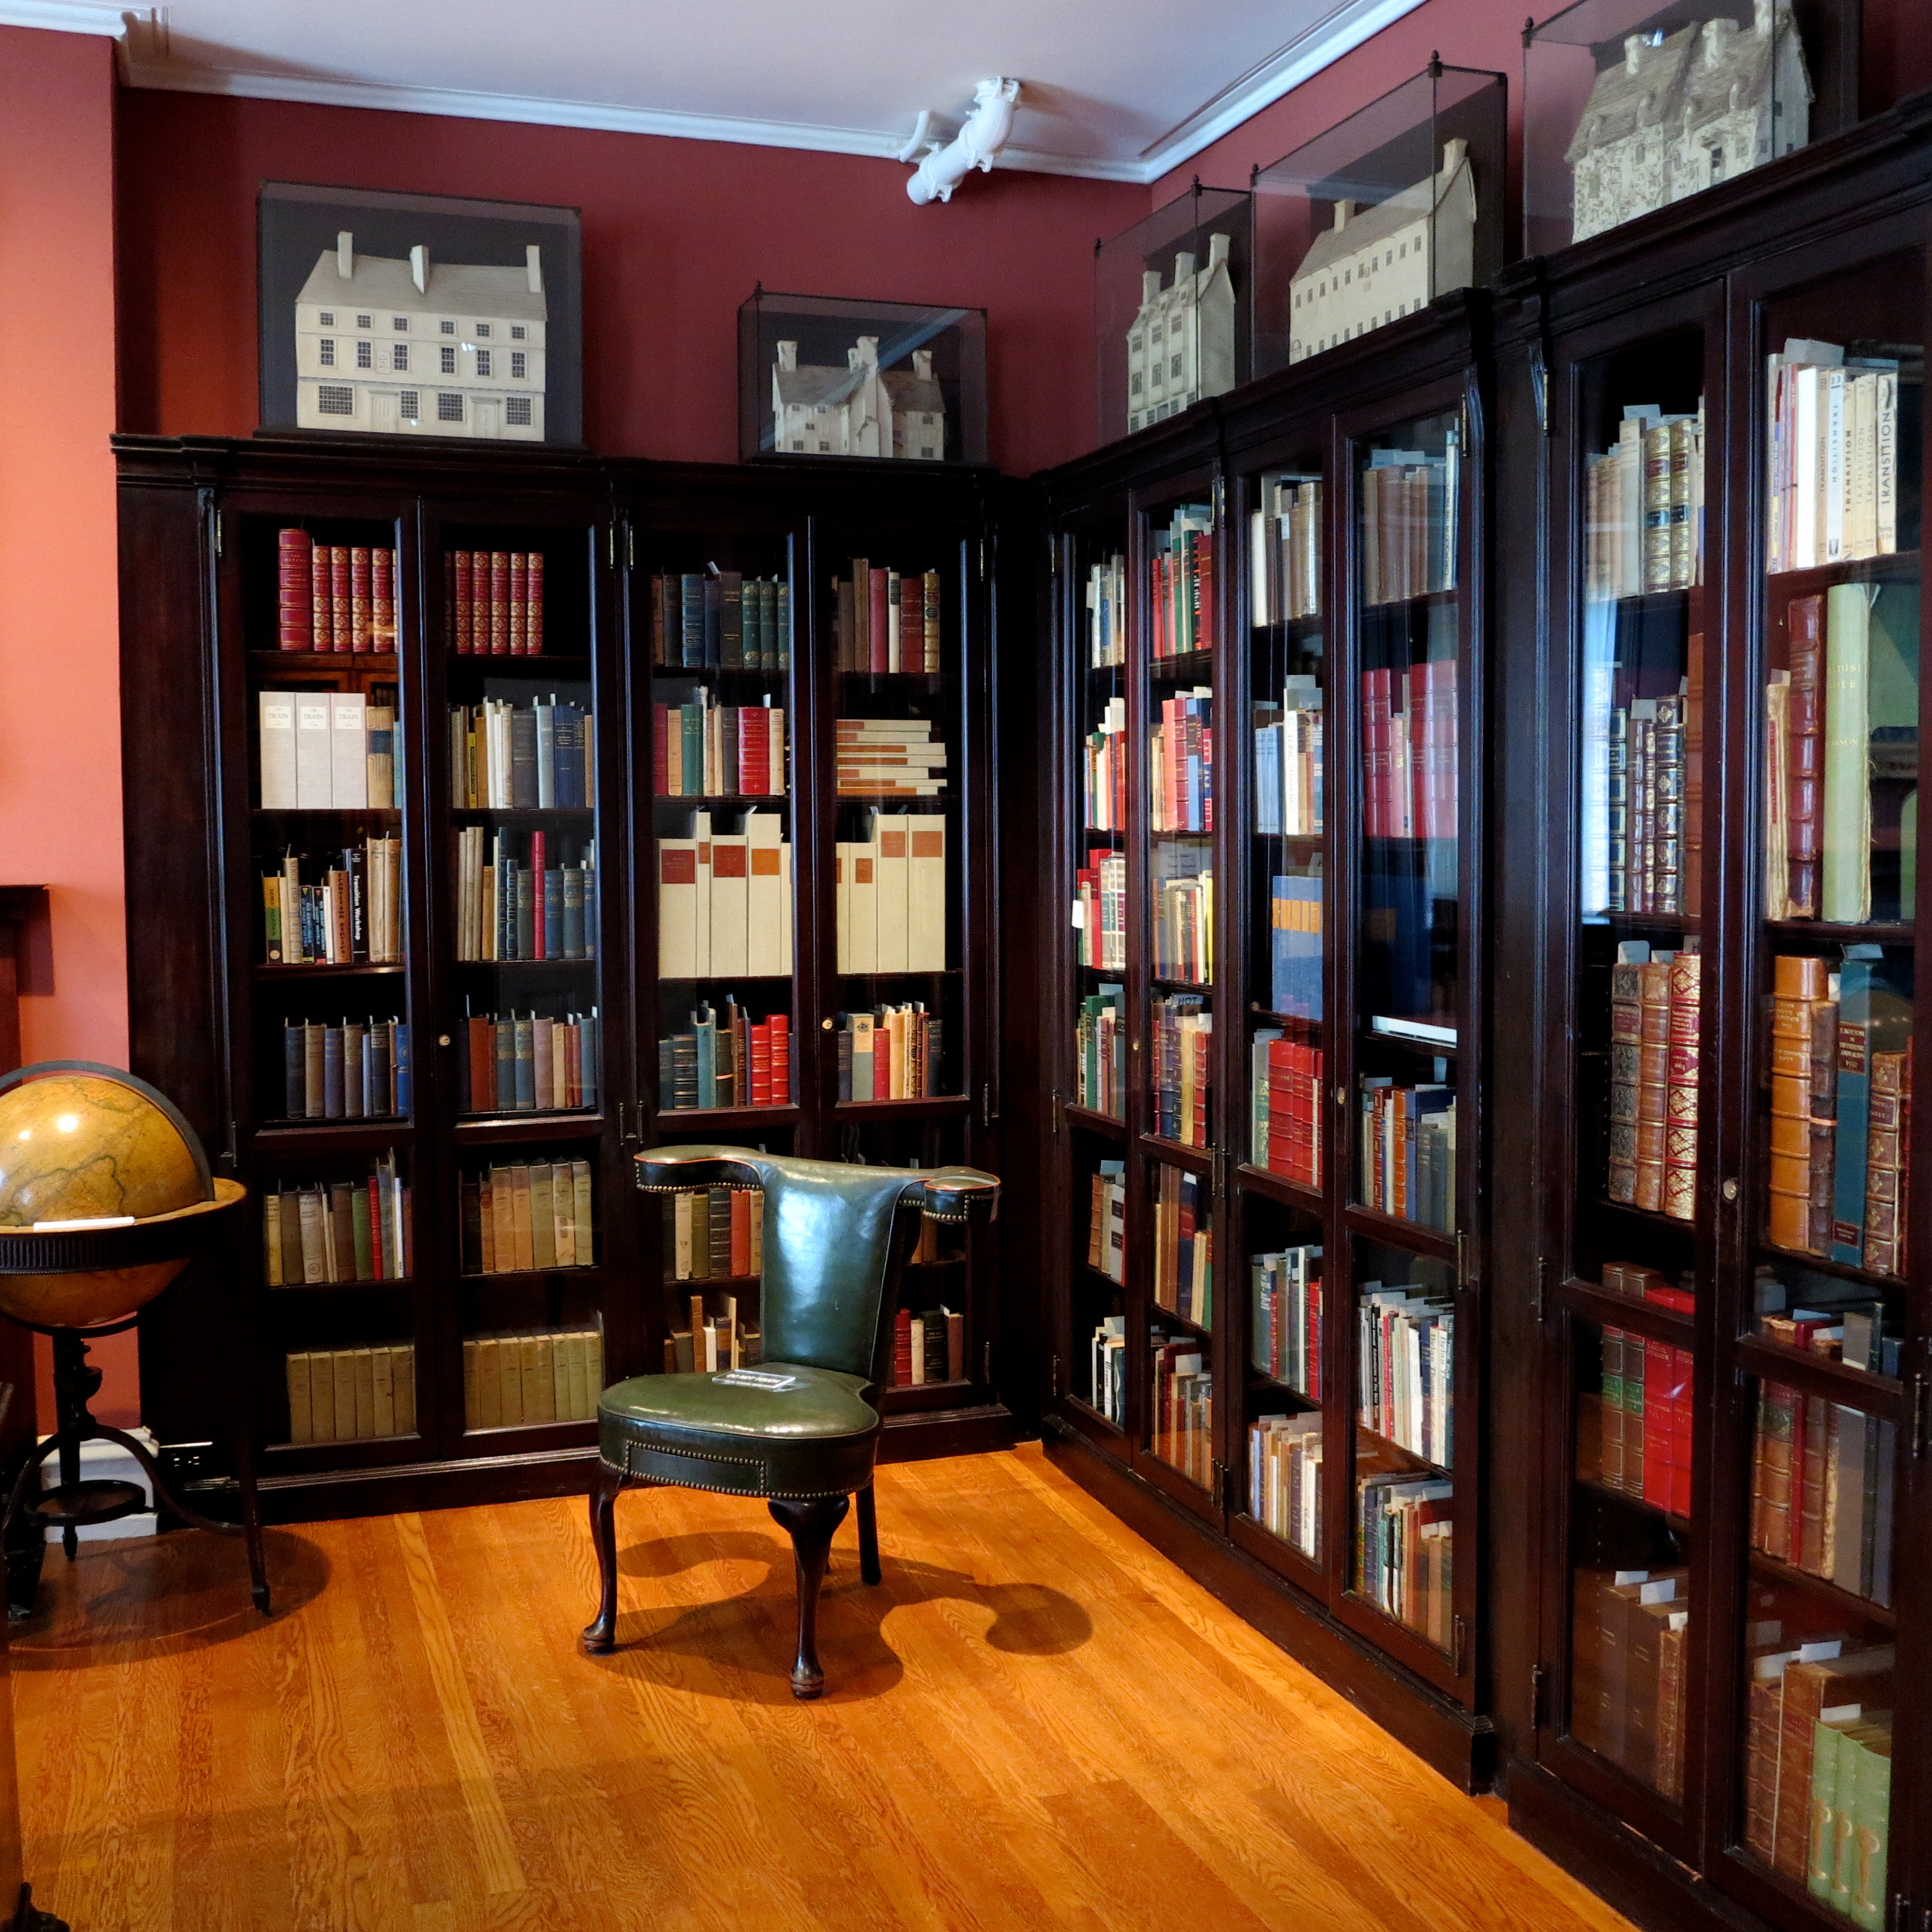 Cases in the Rosenbach Library